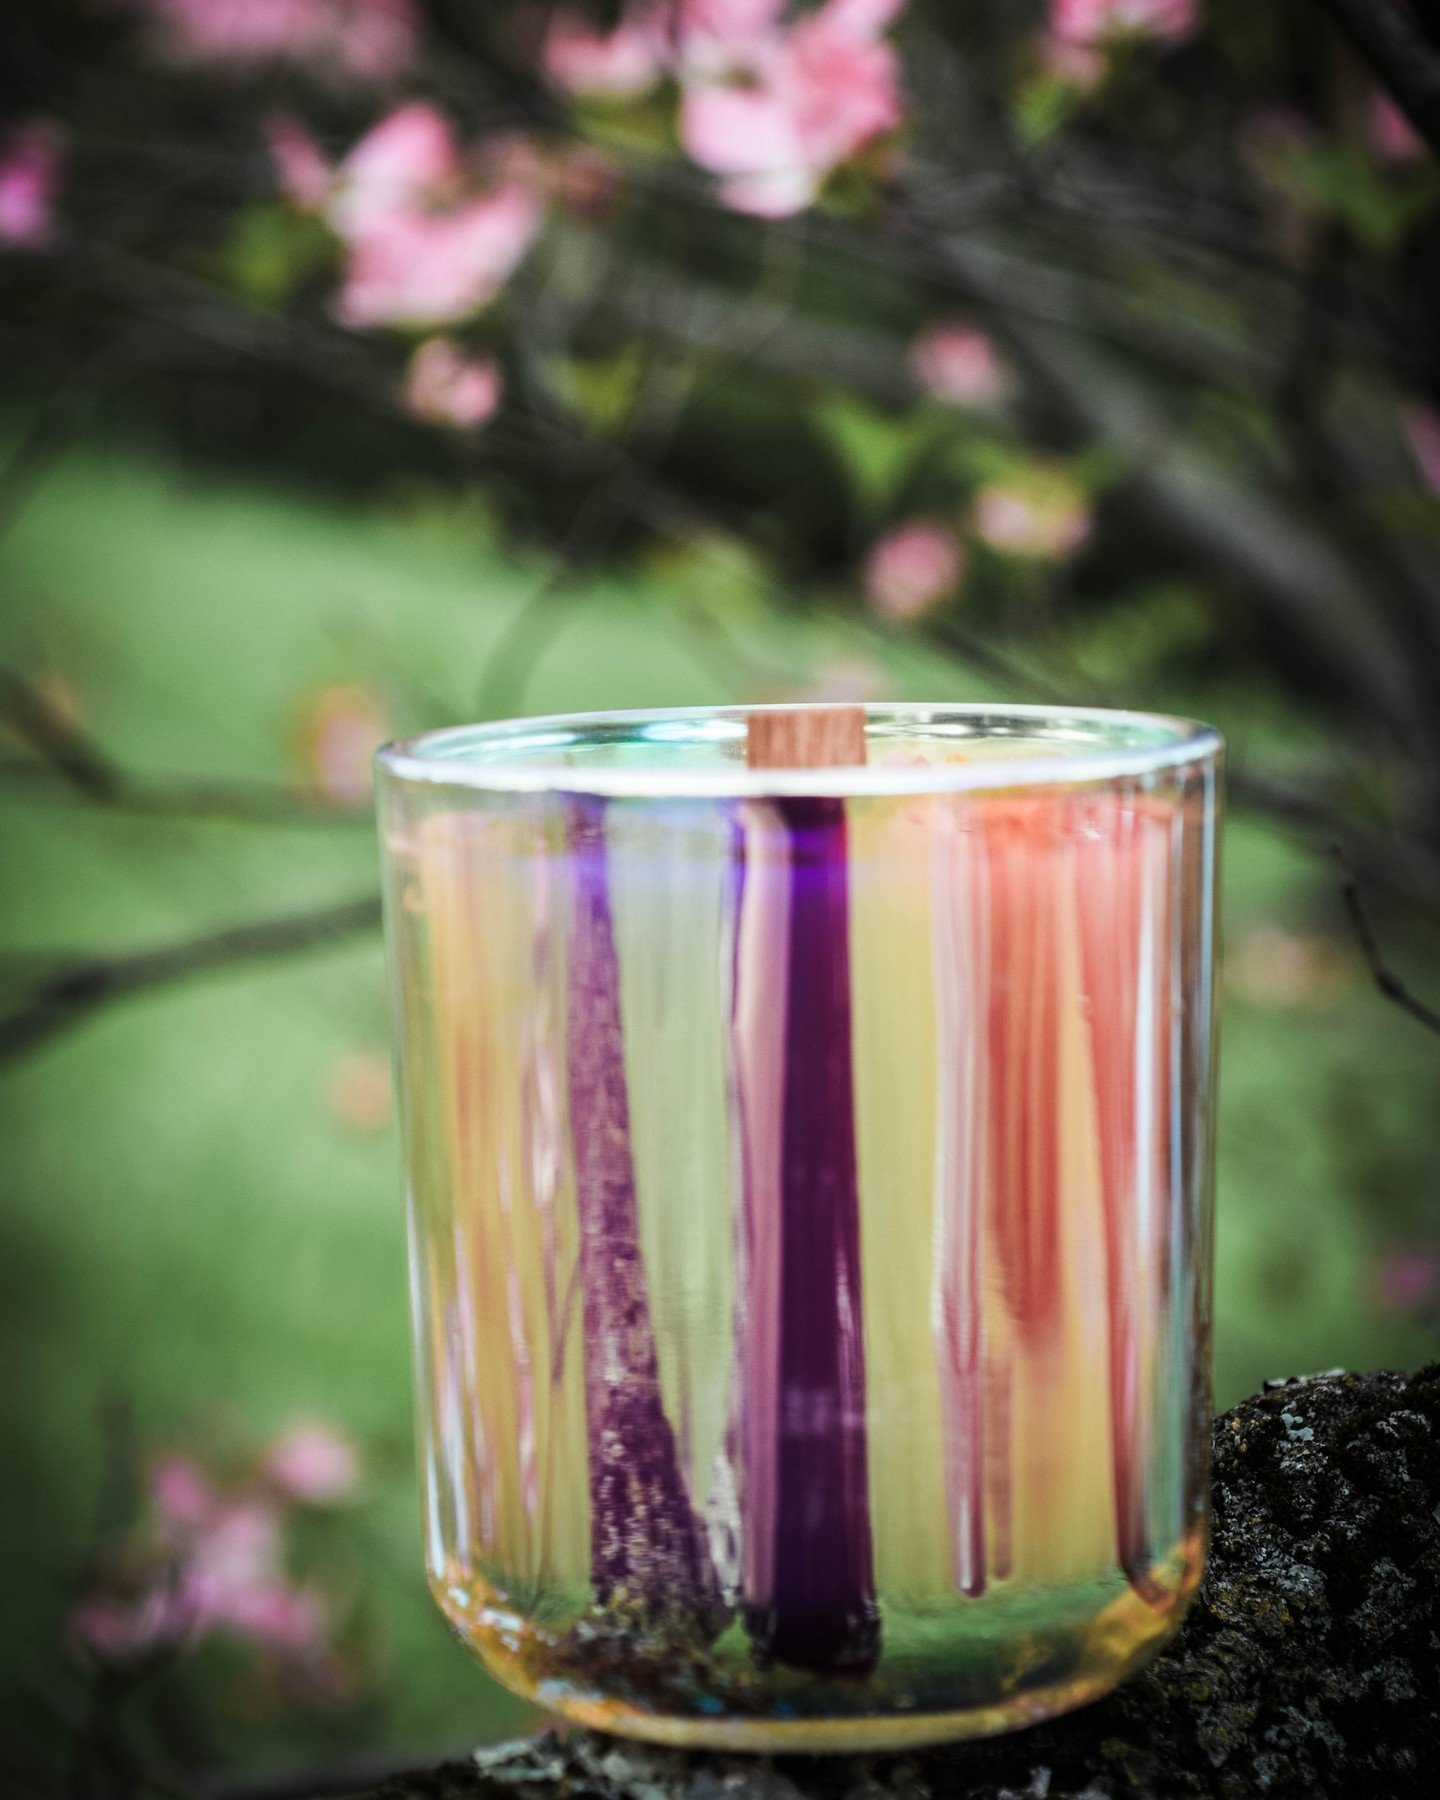 🌞 GIVEAWAY ALERT: Embrace the Color Of Summer Candle! 🌞

Ready to bask in the warm &amp; VIBRANT summer vibes? We're giving away a luxurious 14oz colorful ceramic vessel of our Sun Tarot Candle! Inspired by the MAGICAL energy of Beltane, we want to